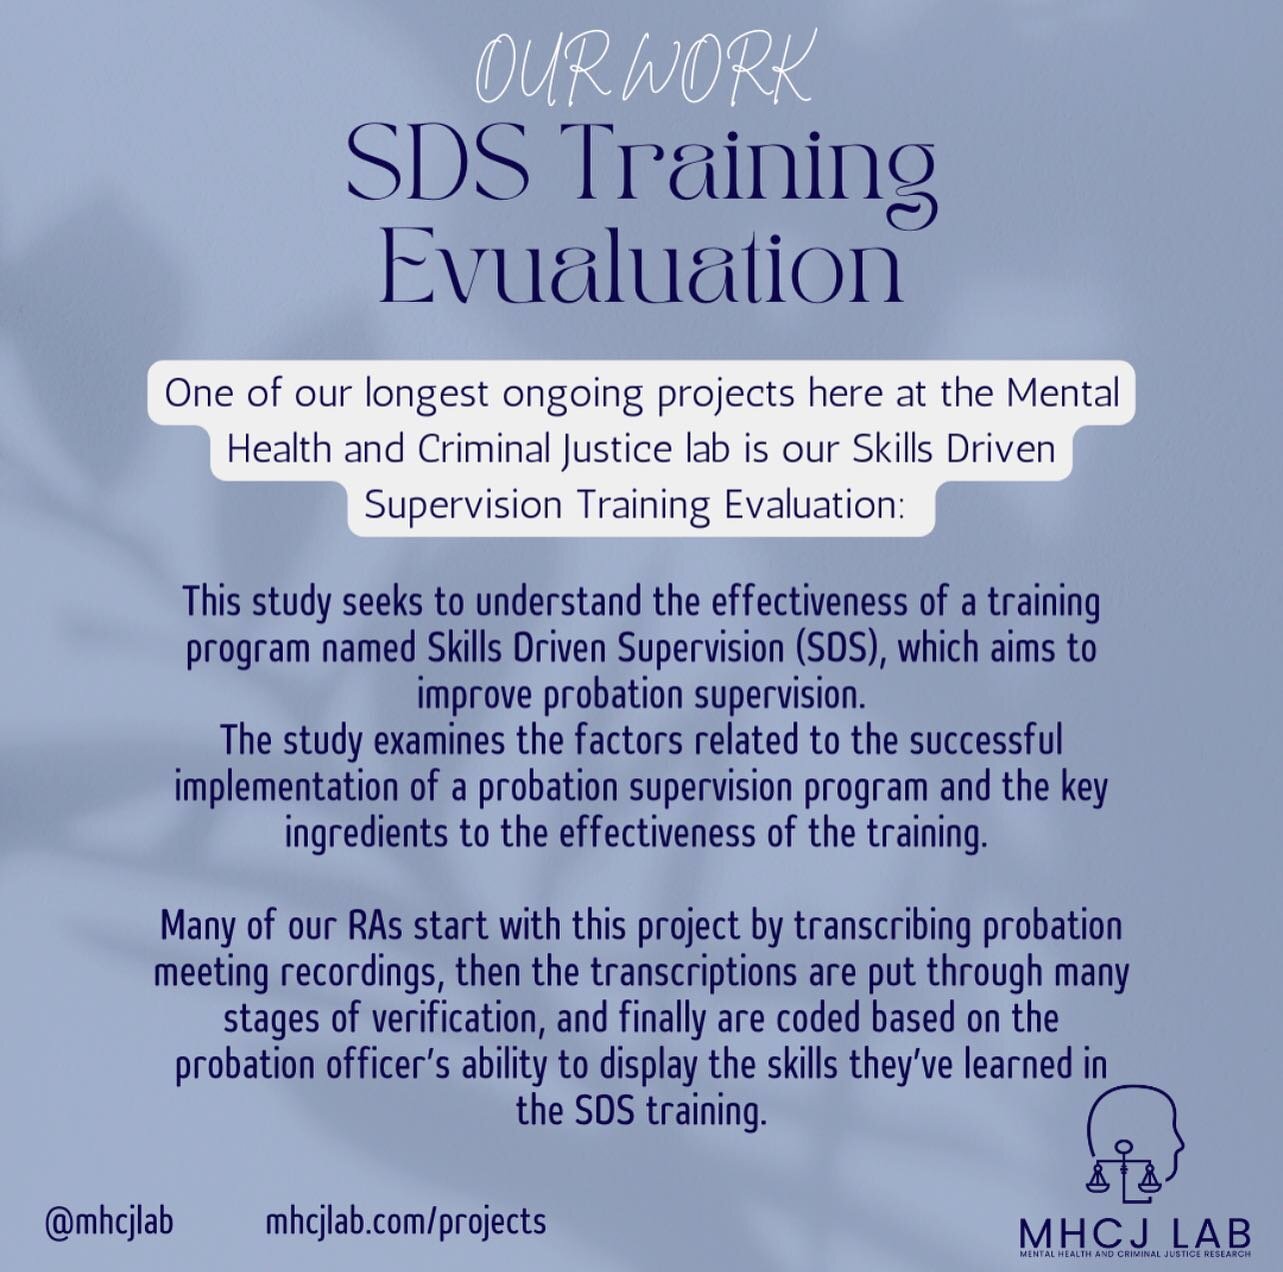 One of our current ongoing projects here at the MHCJ lab is our SDS Evaluation training study. Here&rsquo;s some information about the study and the work being done to collect data.